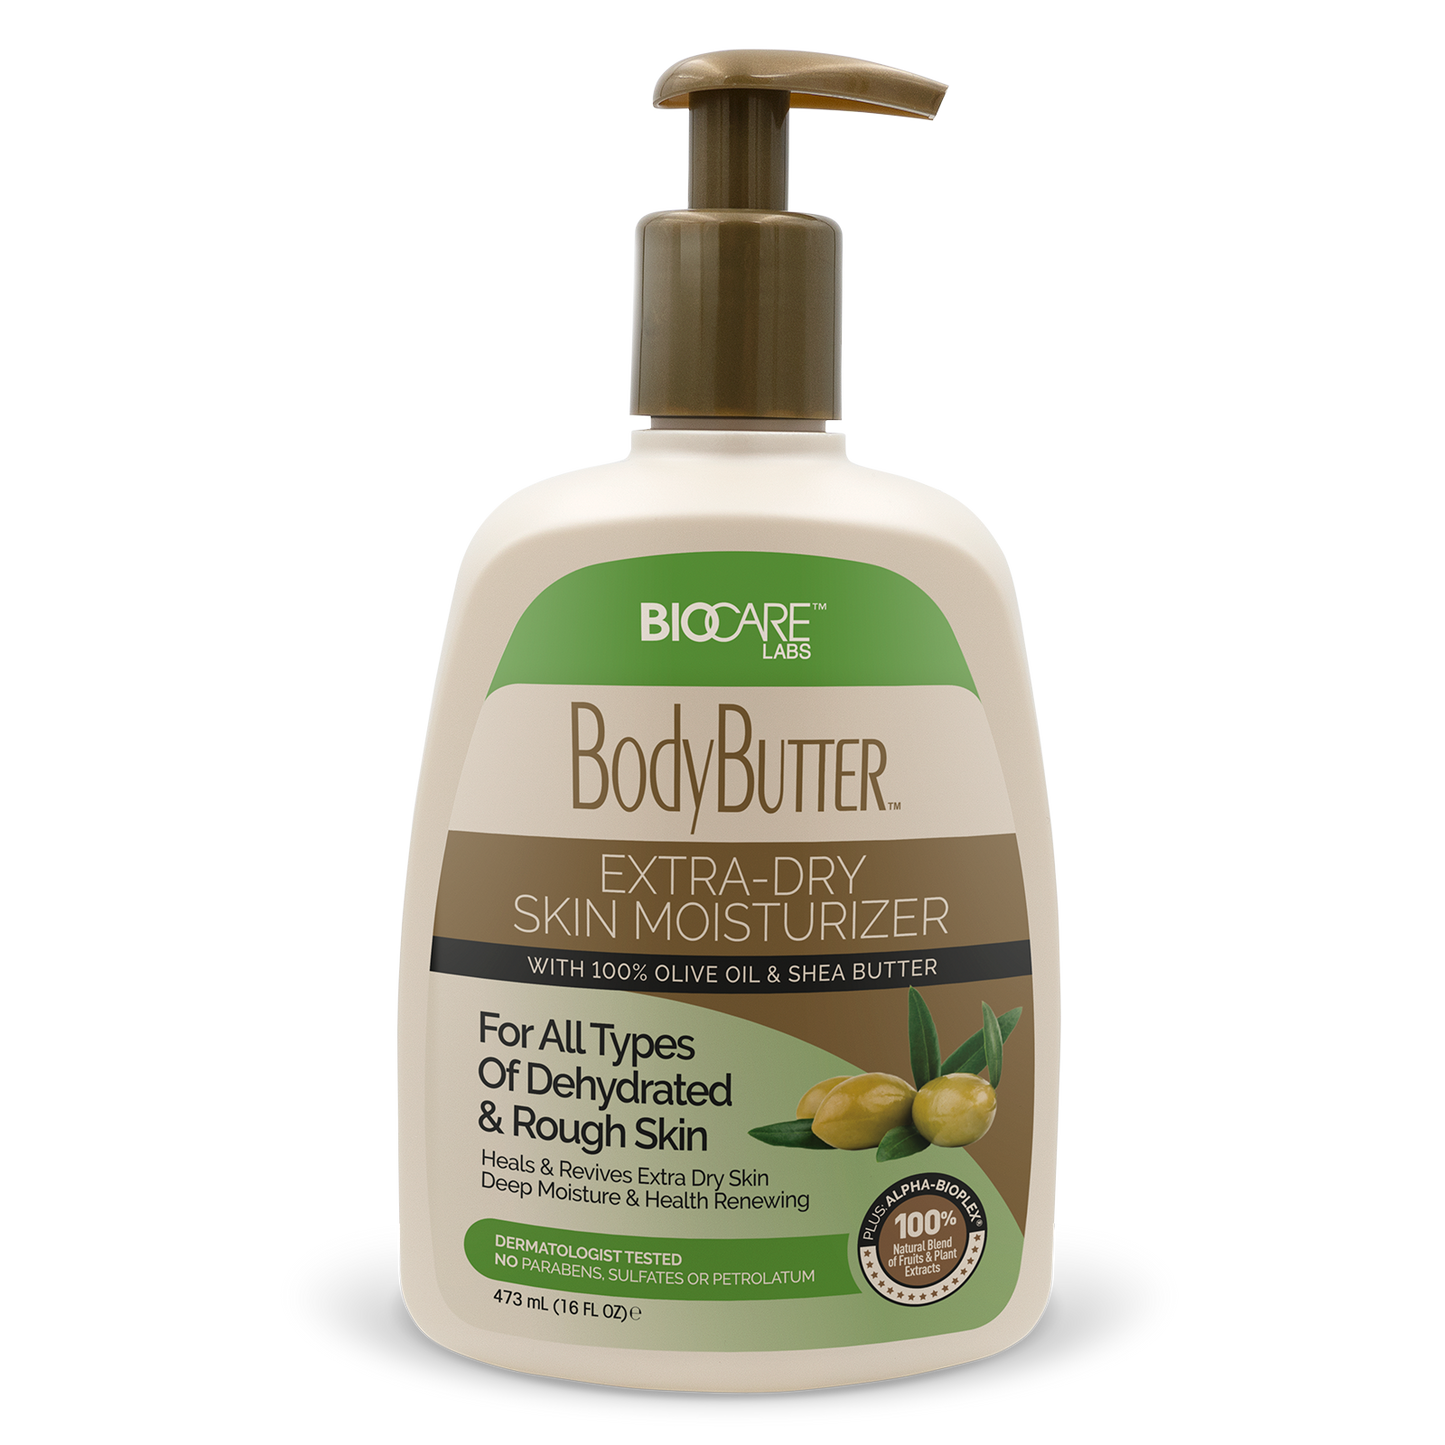 16 oz bottle of BodyButter™ With Olive Oil & Shea Butter from Biocare Labs